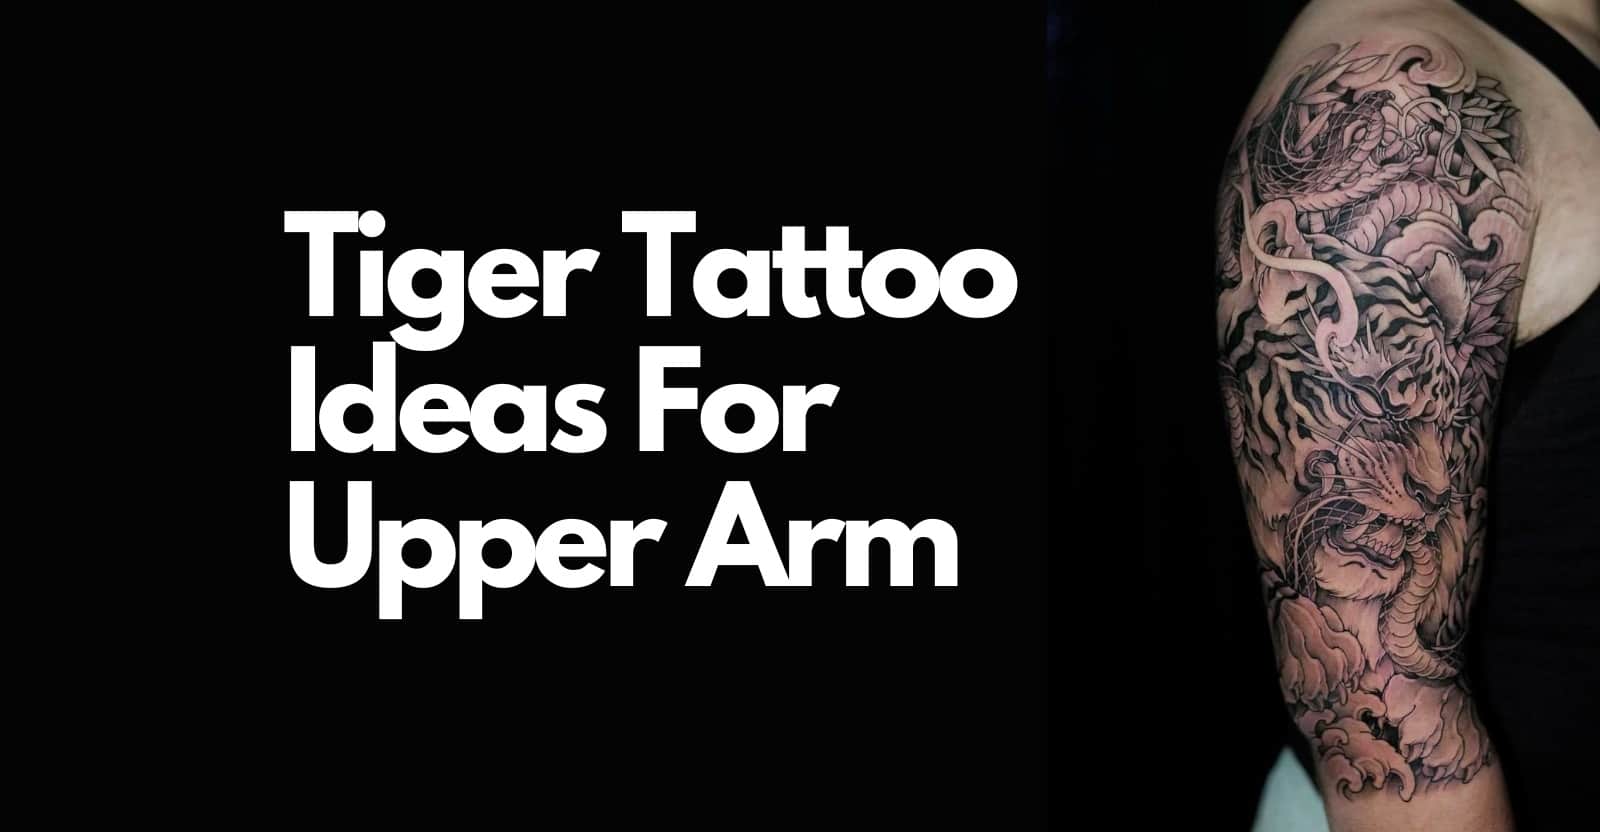 Stunning Tiger Tattoo Designs For The Upper Arm